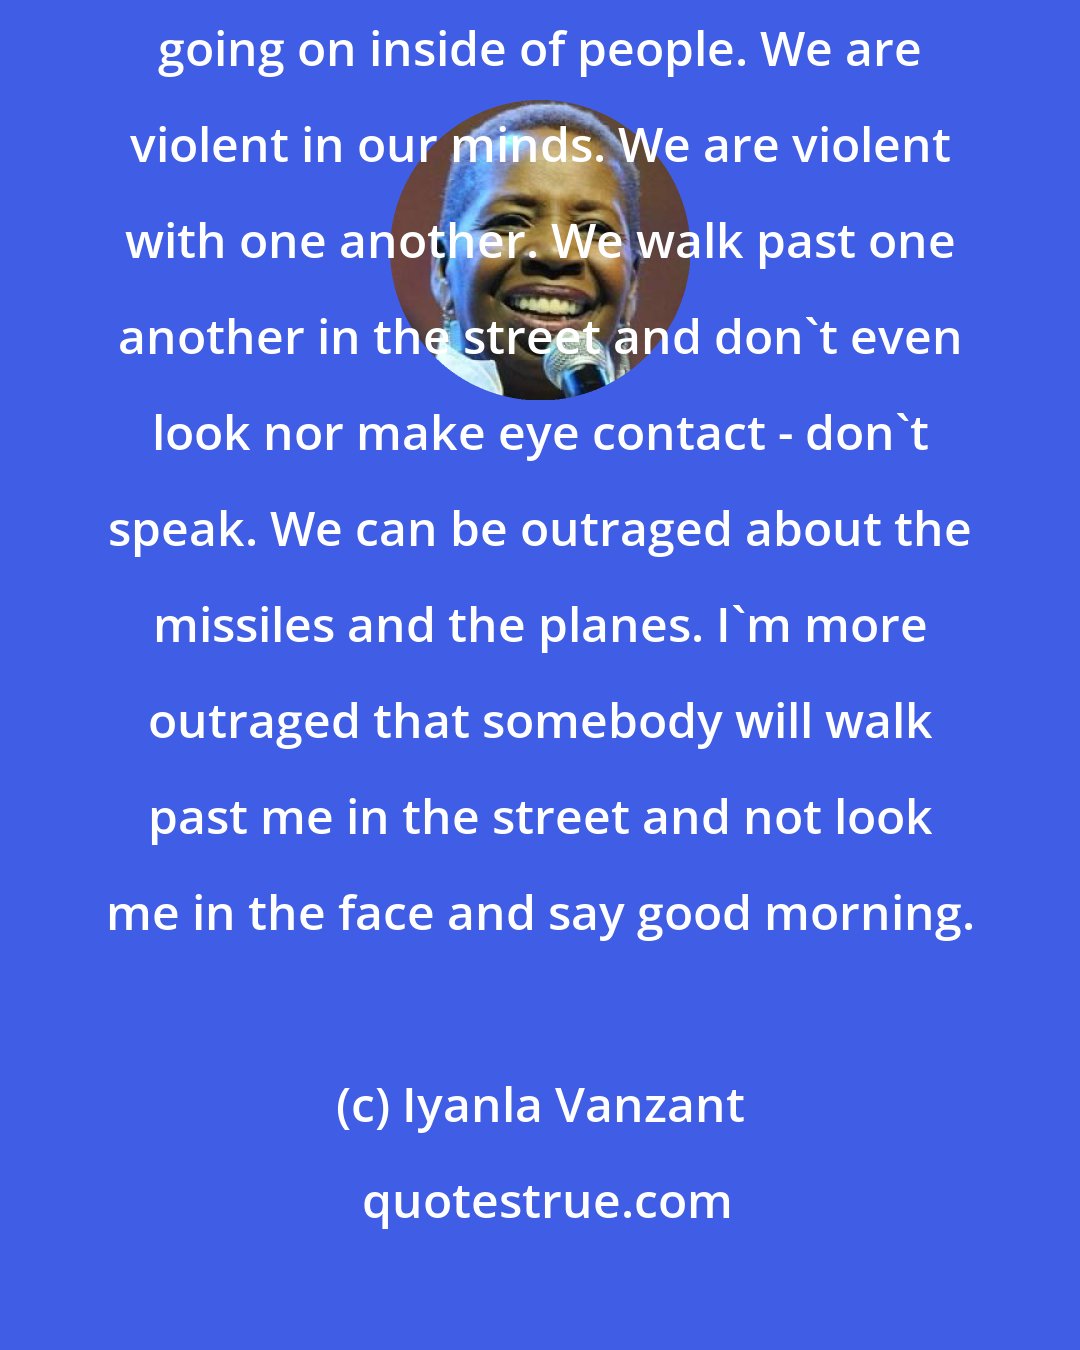 Iyanla Vanzant: Everything that's happening in our world is a function of what is going on inside of people. We are violent in our minds. We are violent with one another. We walk past one another in the street and don't even look nor make eye contact - don't speak. We can be outraged about the missiles and the planes. I'm more outraged that somebody will walk past me in the street and not look me in the face and say good morning.